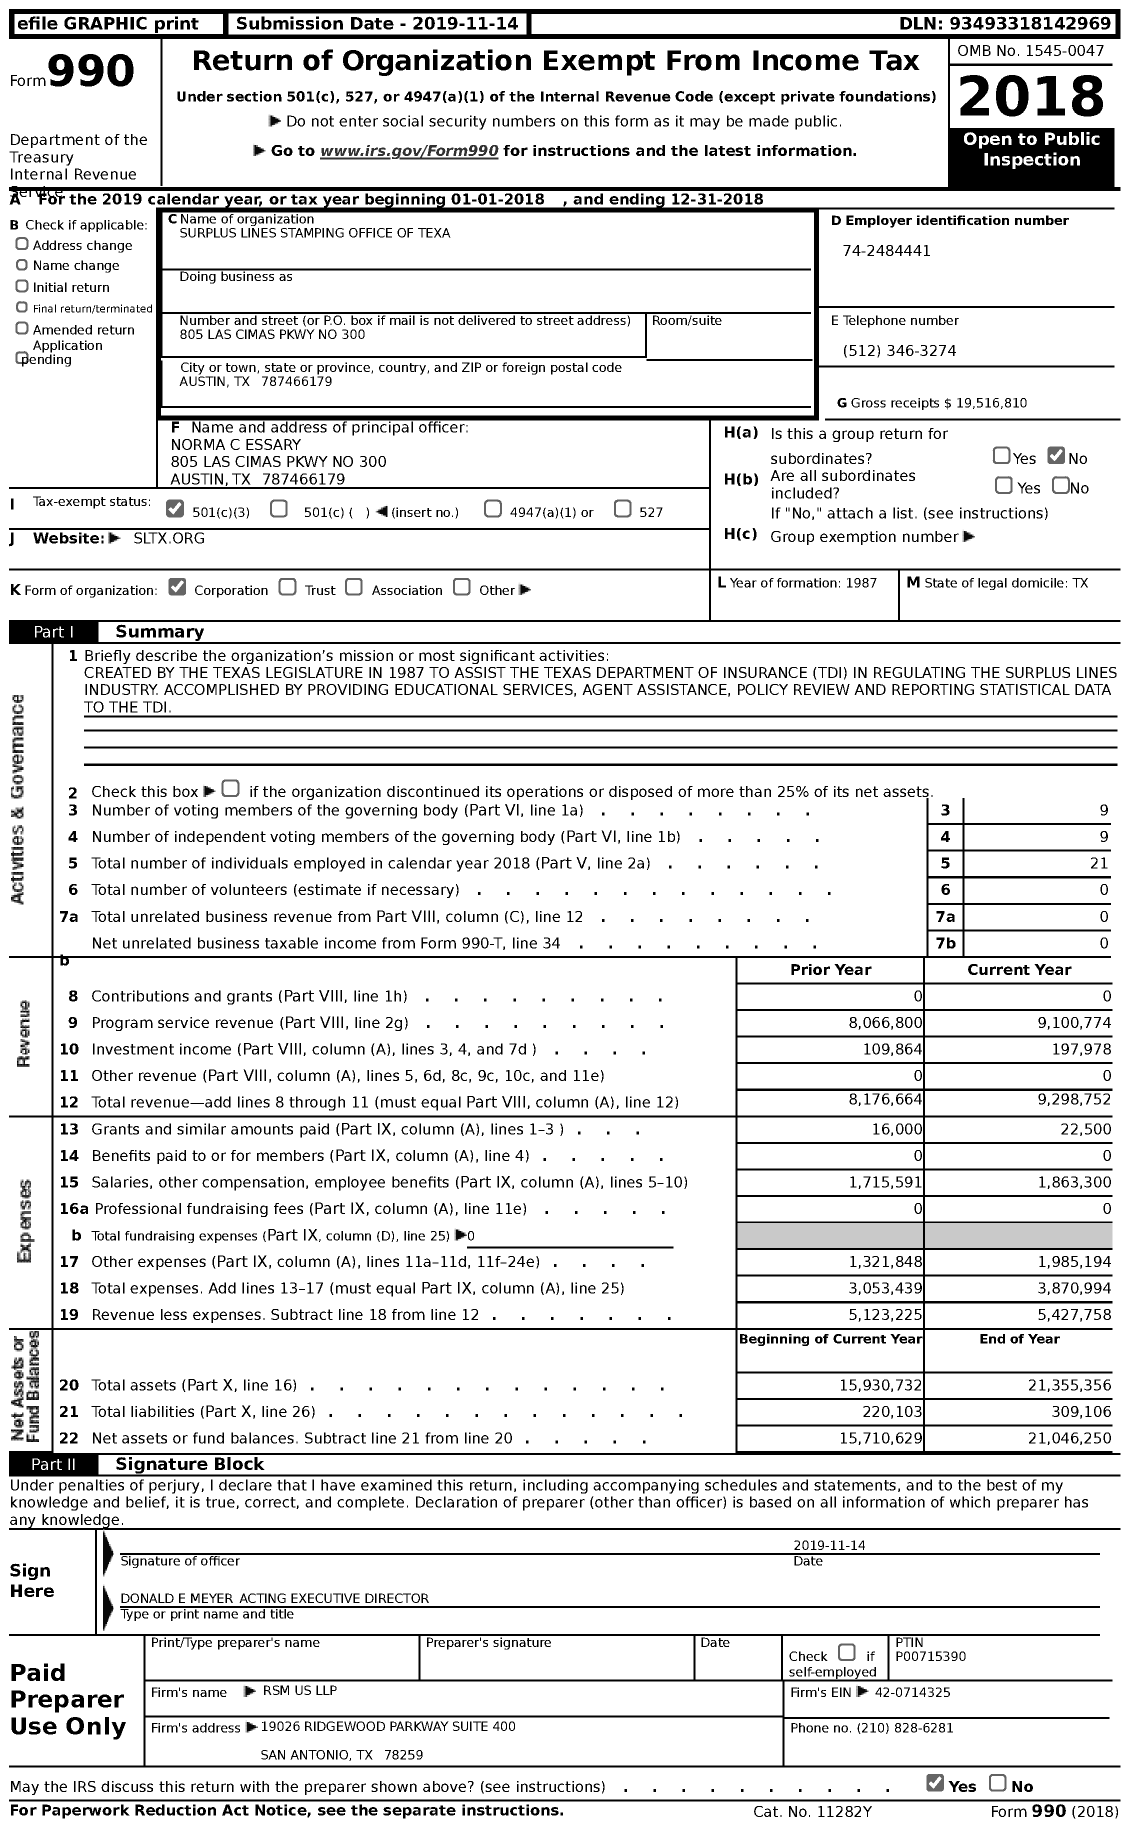 Image of first page of 2018 Form 990 for Surplus Lines Stamping Office of Texas (SLSOT)